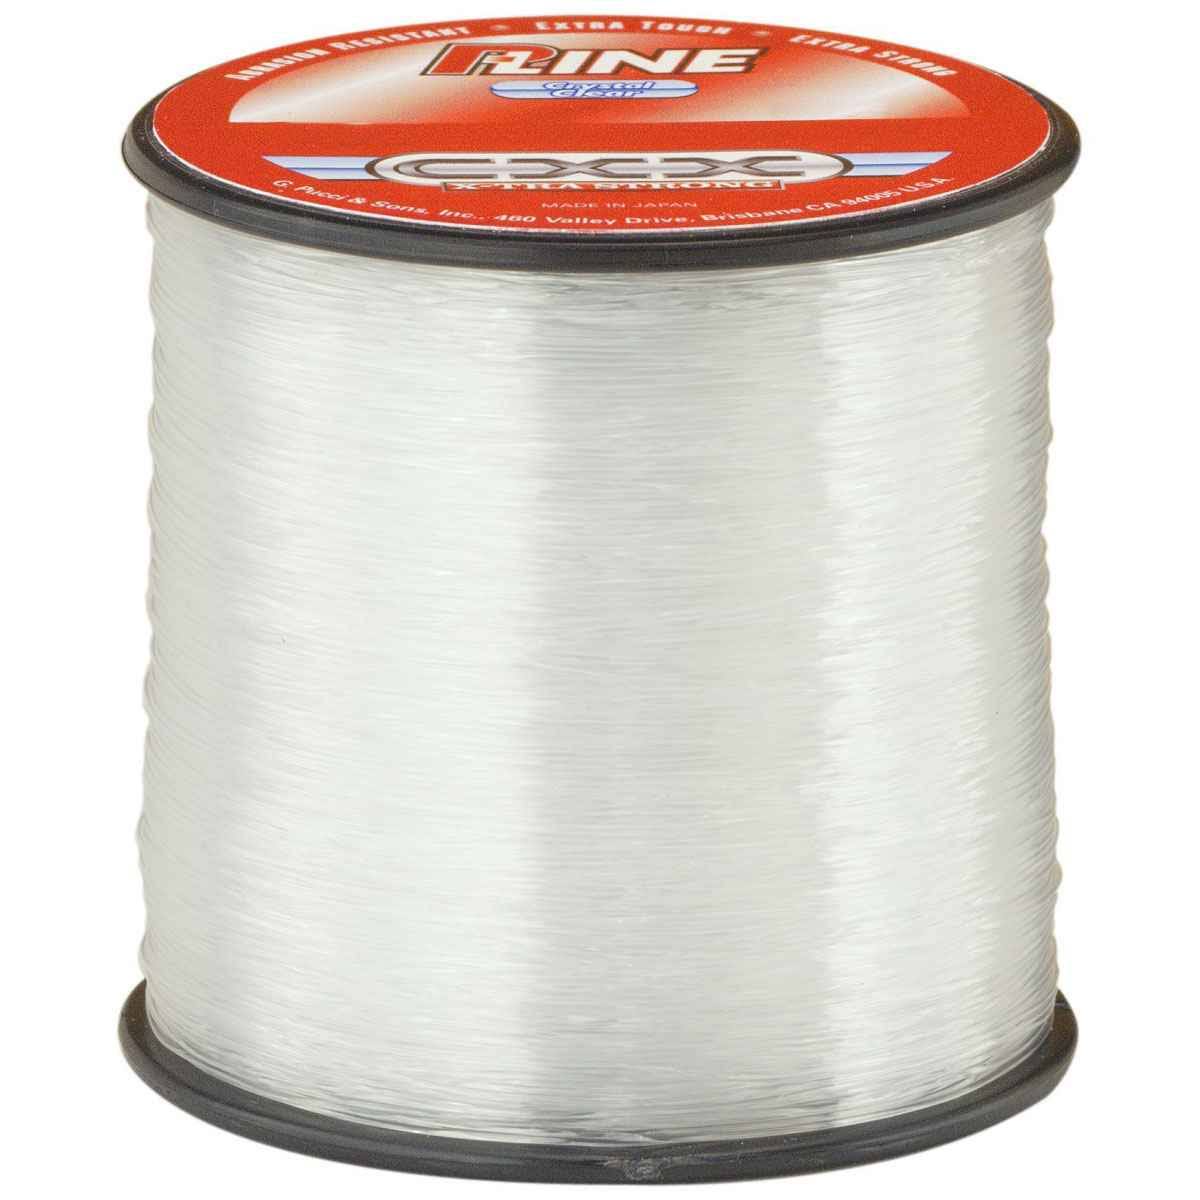 P-Line CXX-Xtra Strong 1/4 Size Fishing Spool, Crystal Clear [500-yard/ 25-pound]